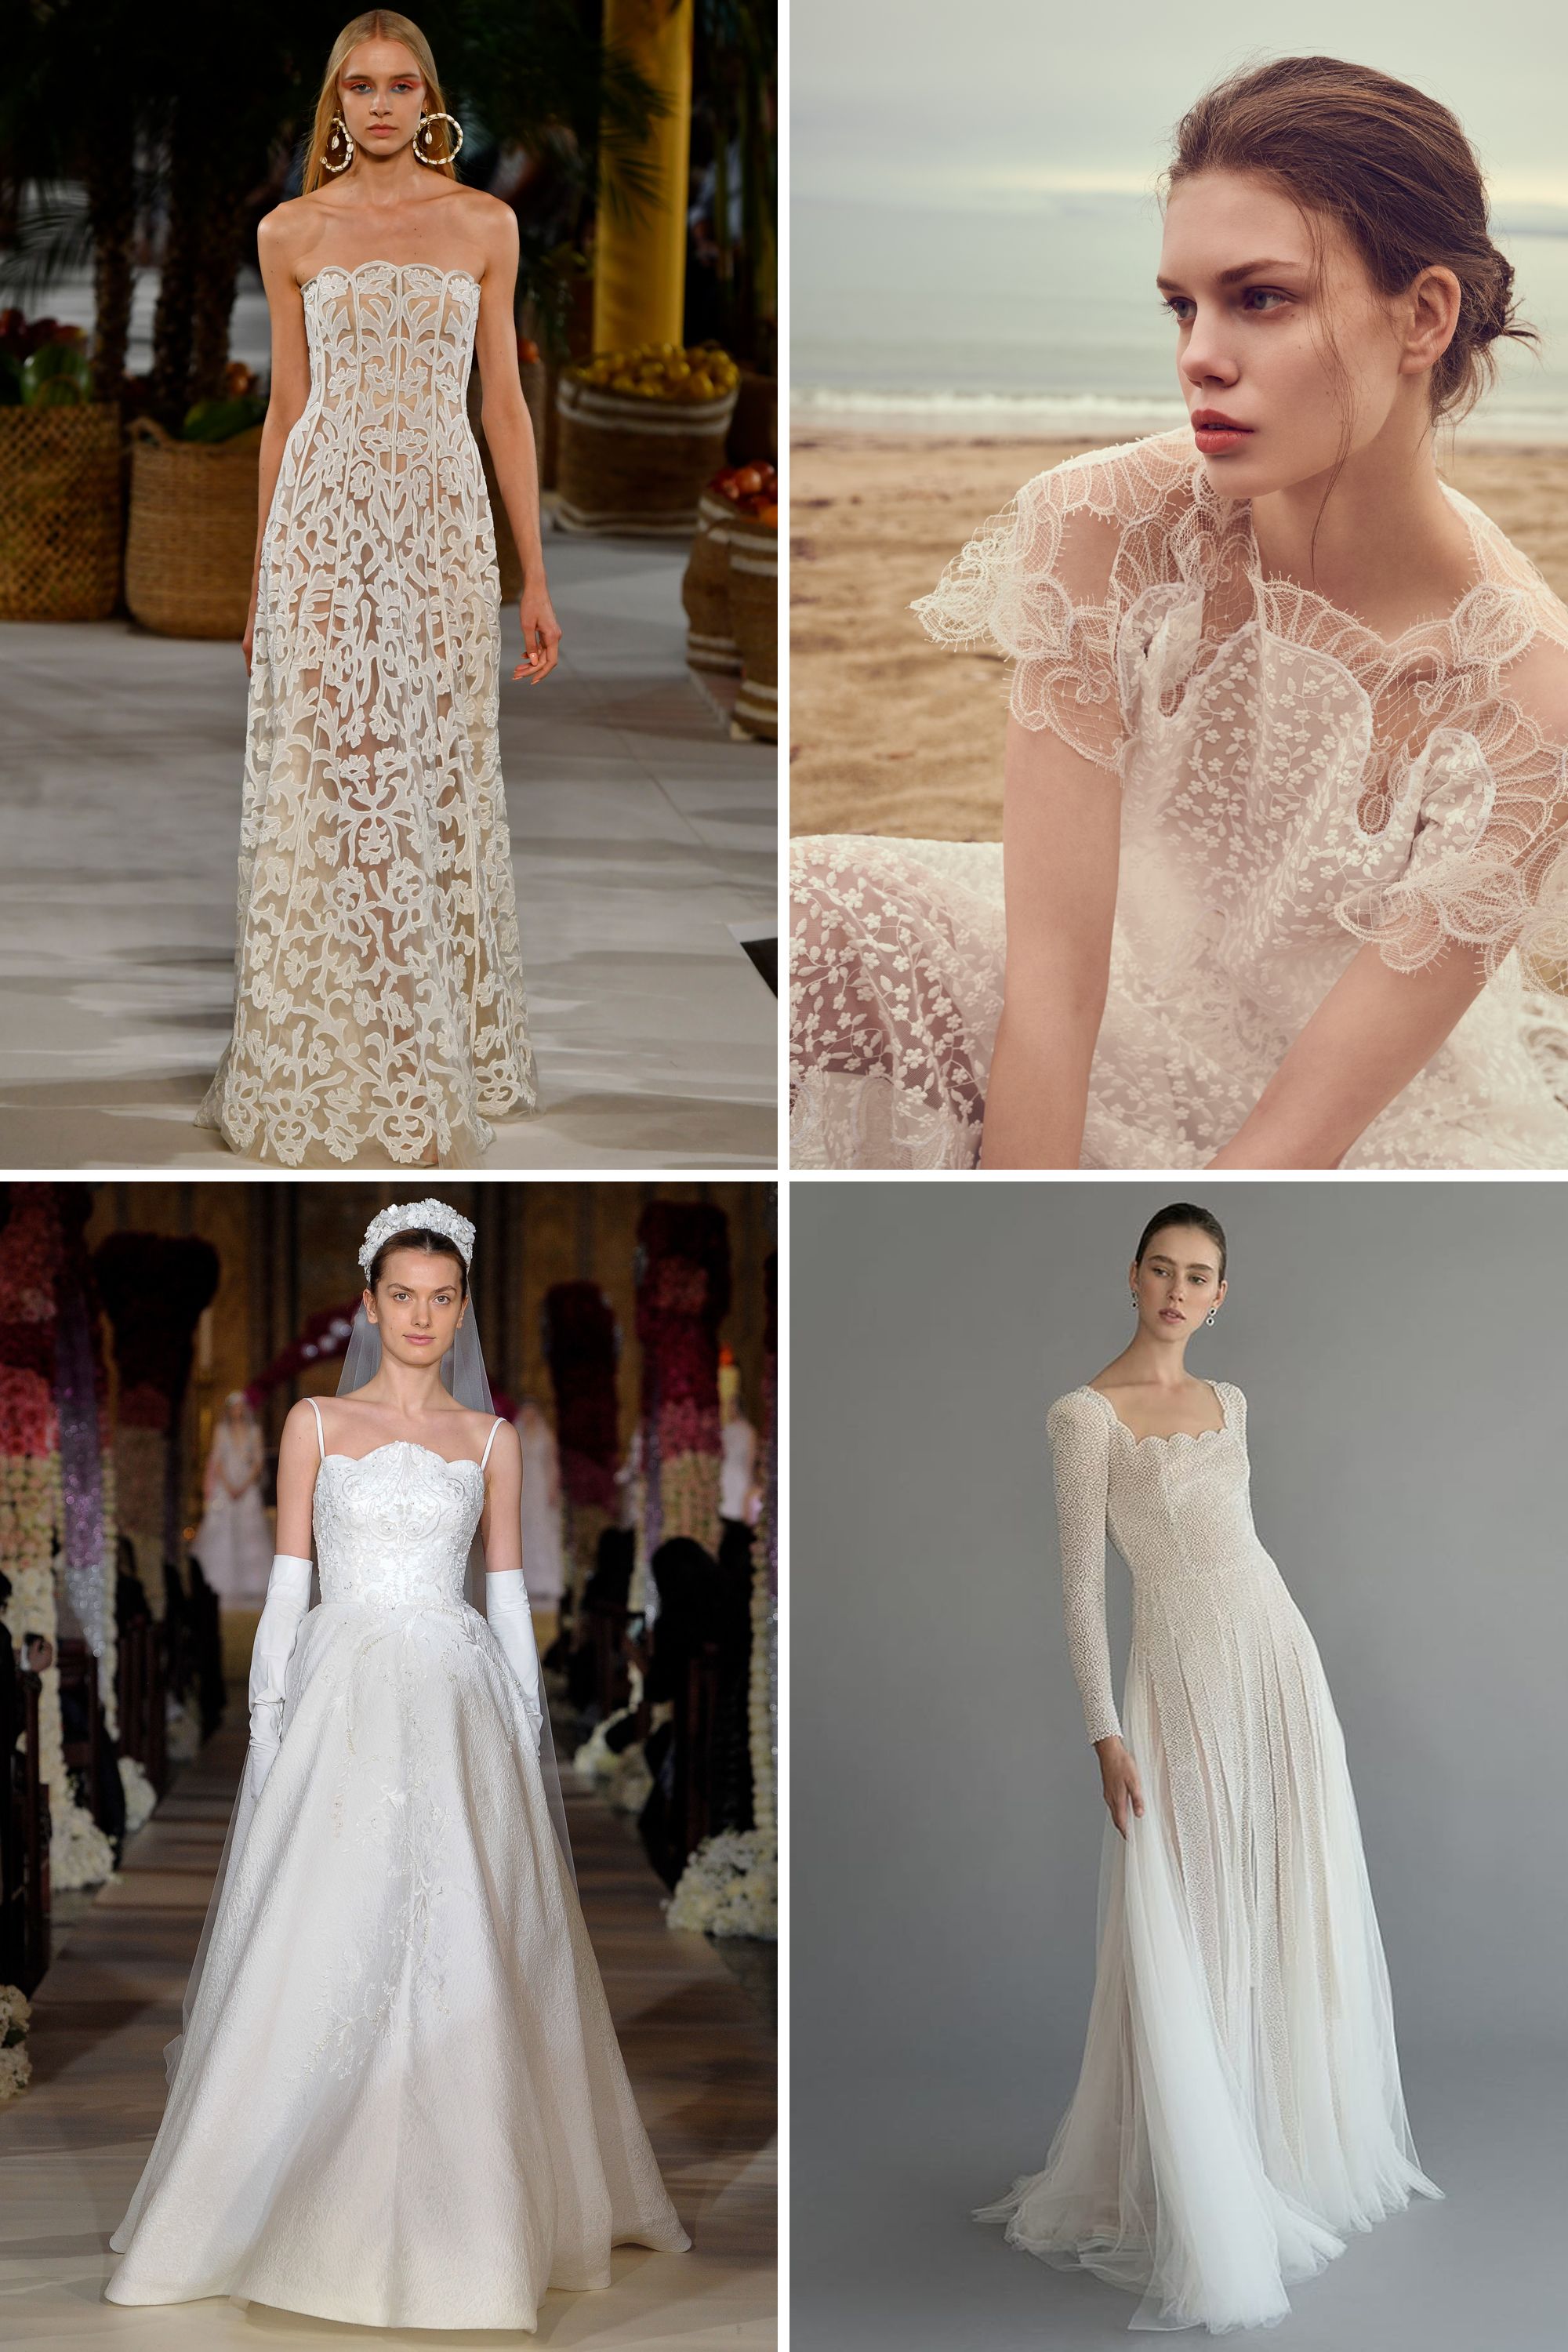 The 20 Wedding Dress Trends of 2020 